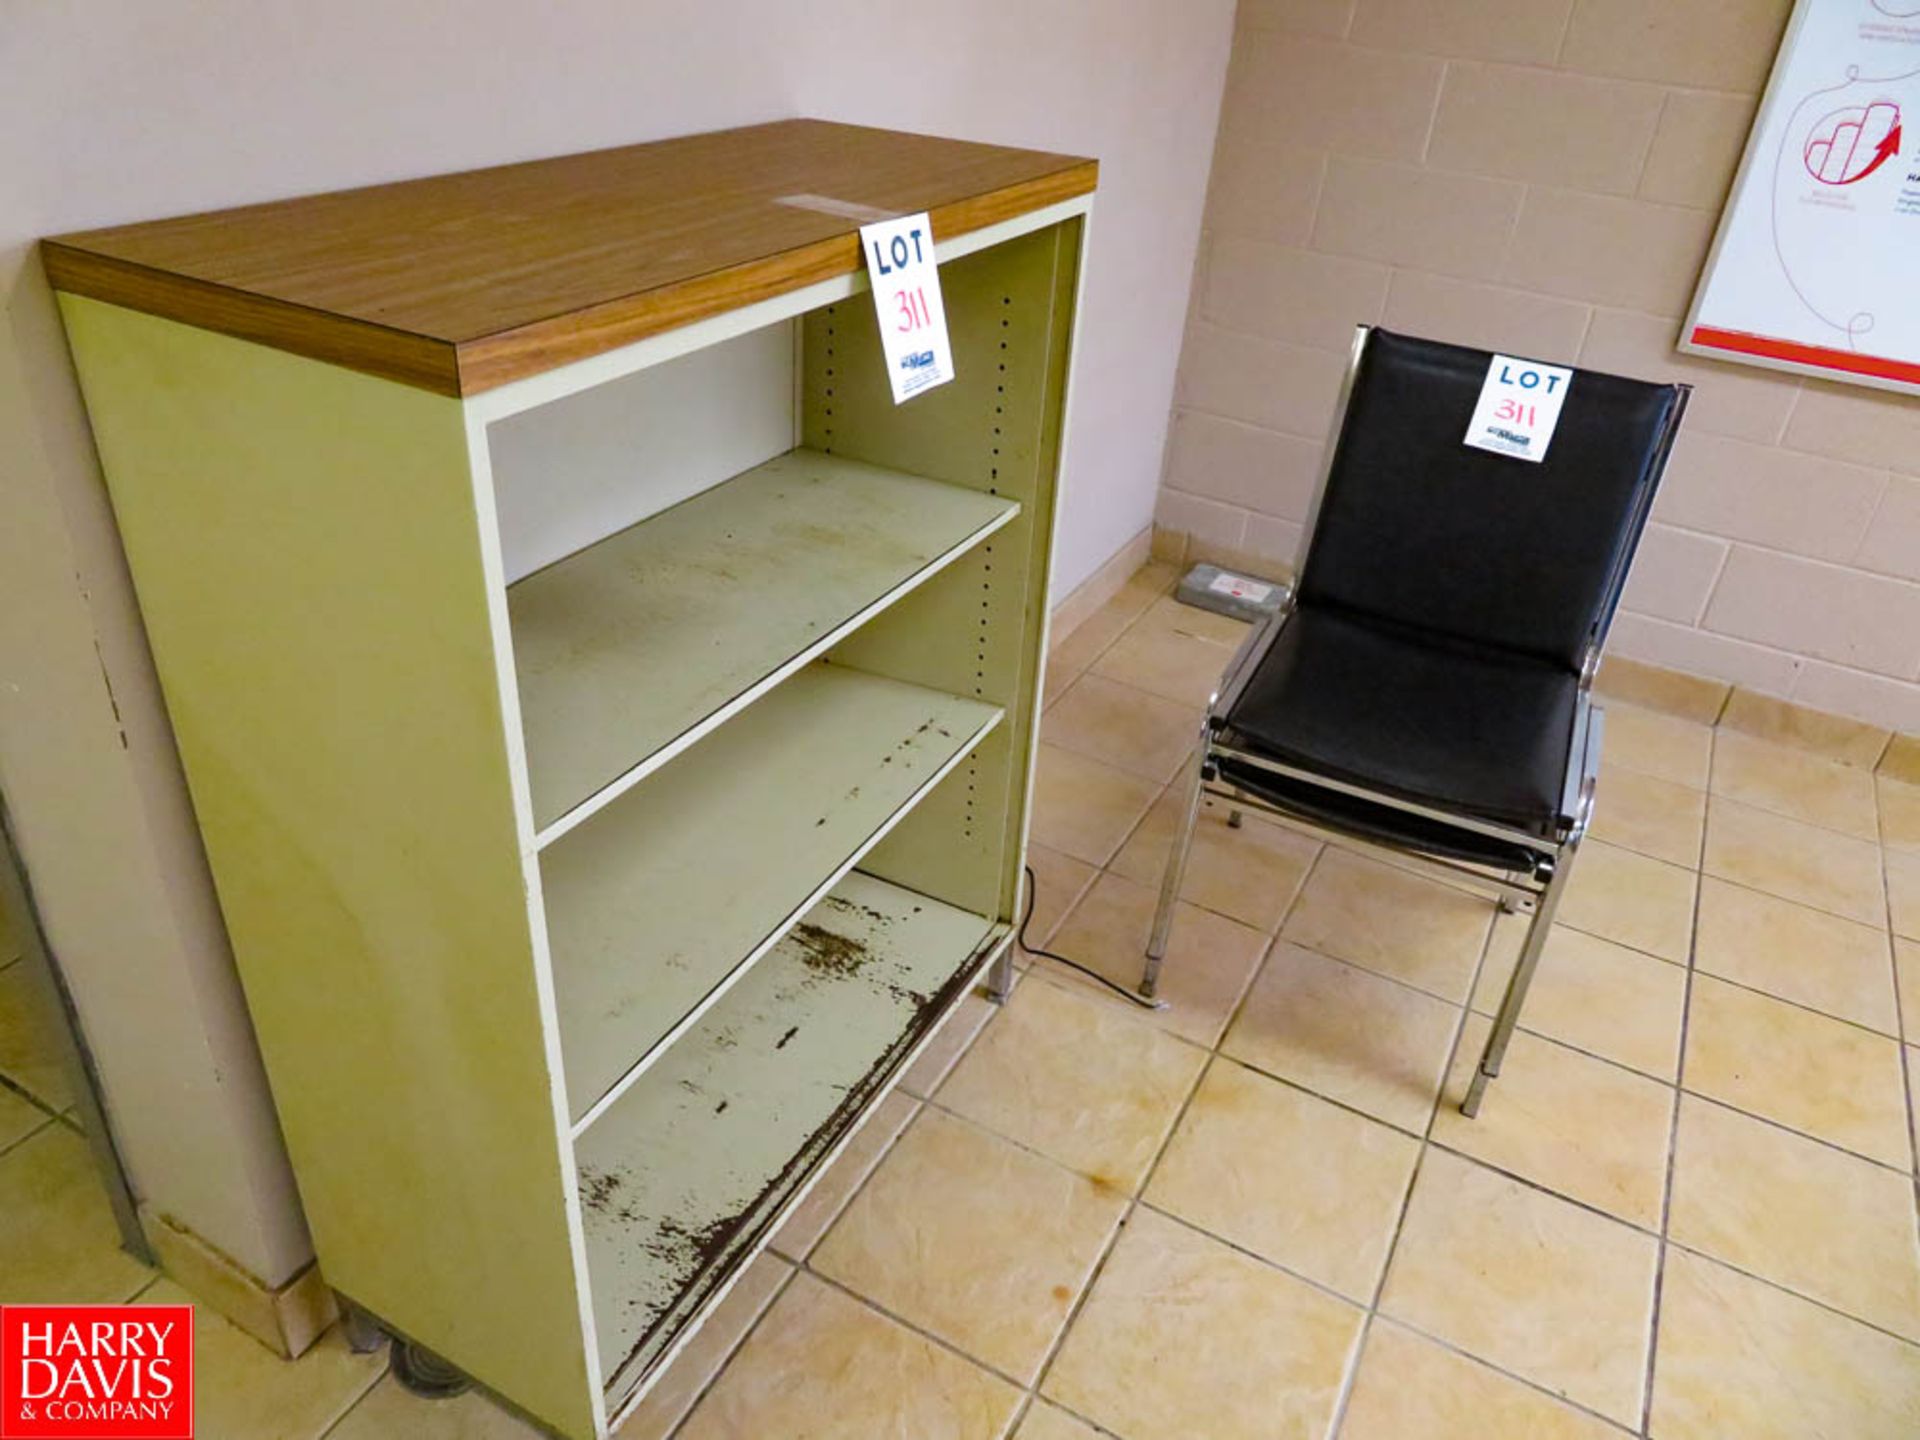 Lunch Room Items: Desk, Chairs, Tables, Microwave Rigging Fee: $140 - Image 3 of 6